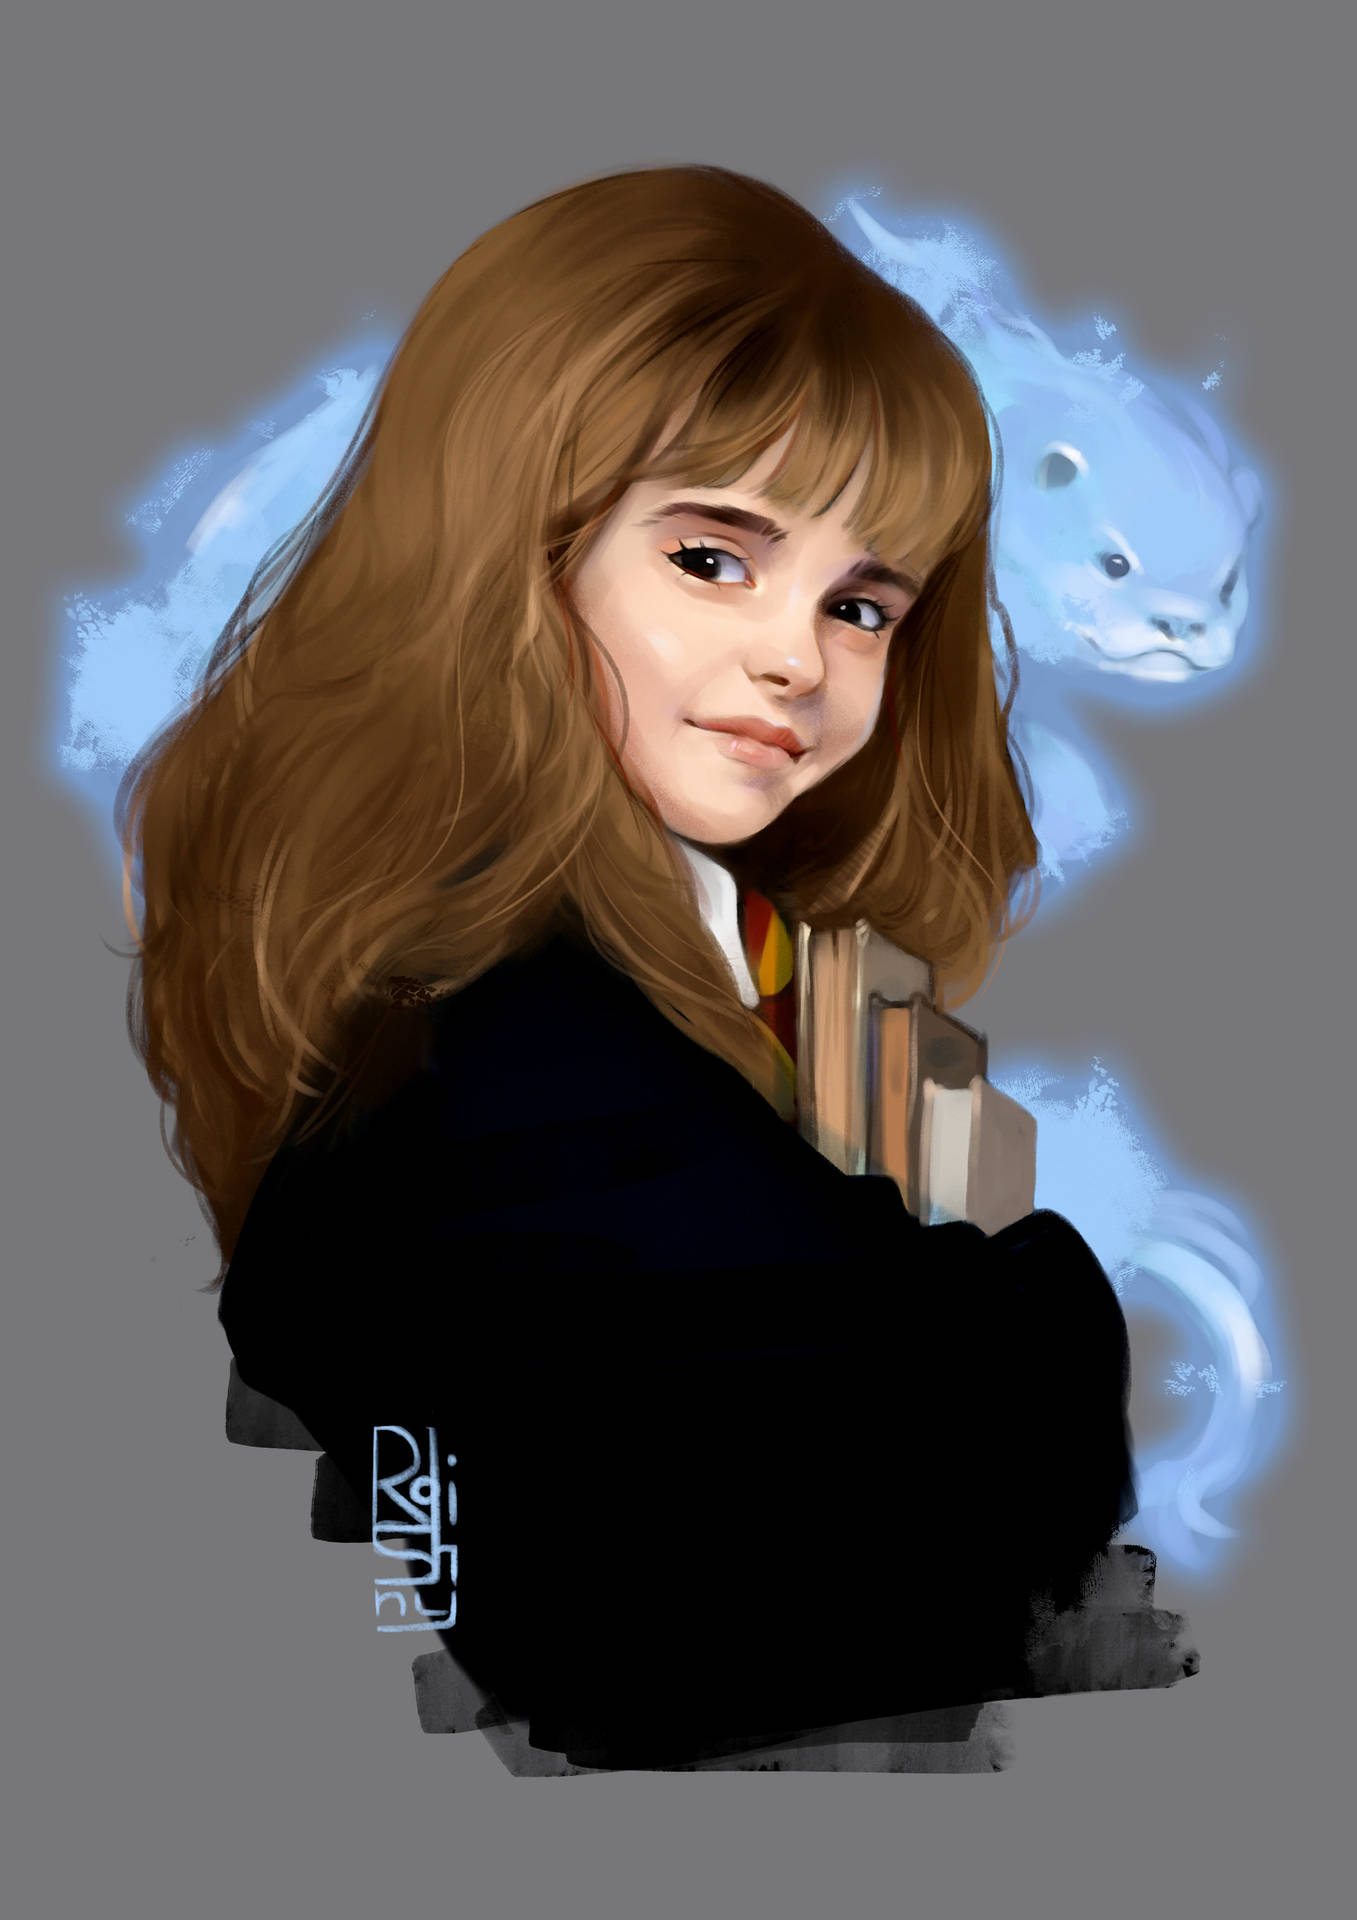 Hermione Granger: A Clever Witch